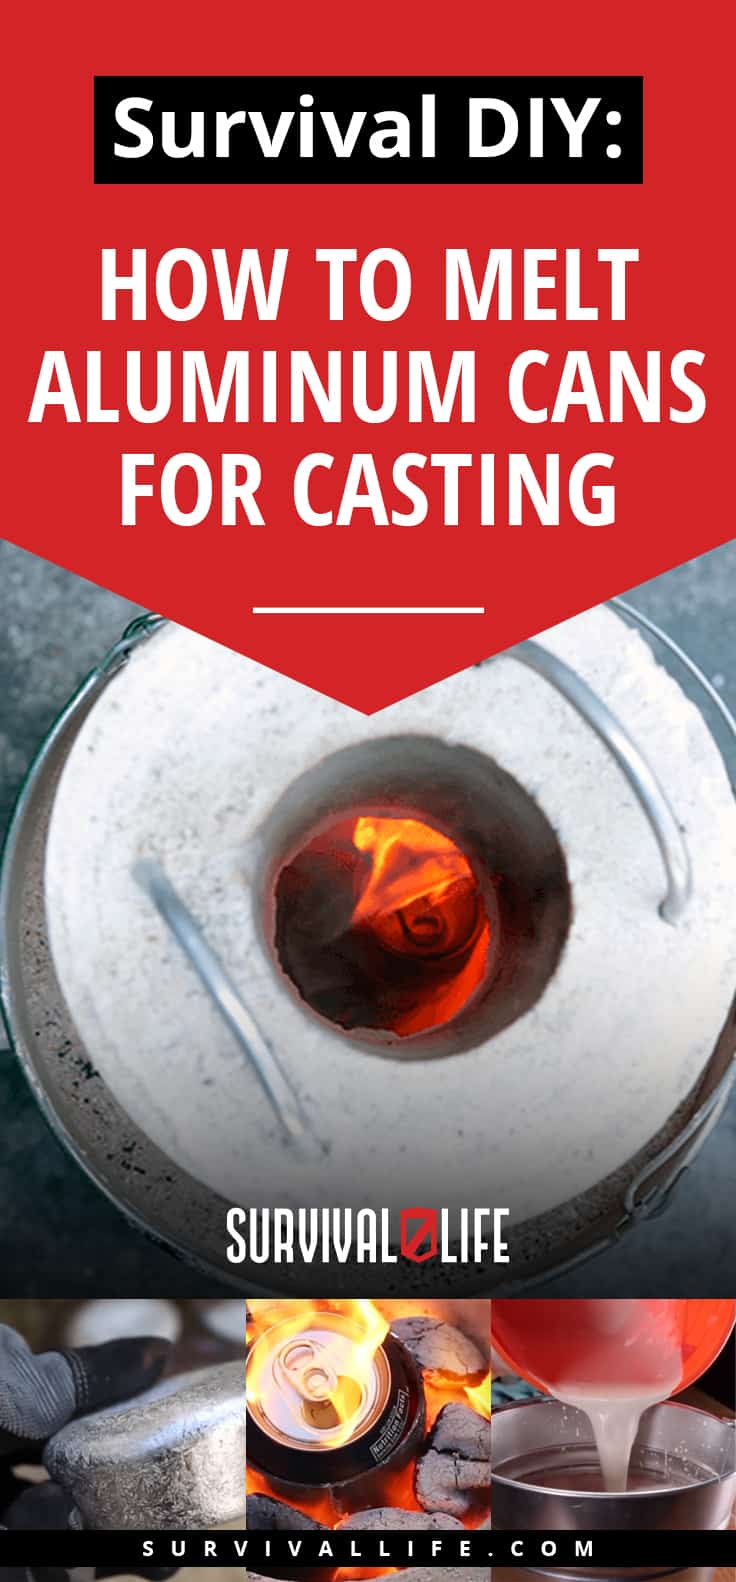 Survival DIY: How To Melt Aluminum Cans For Casting | https://survivallife.com/how-to-melt-aluminum-cans/